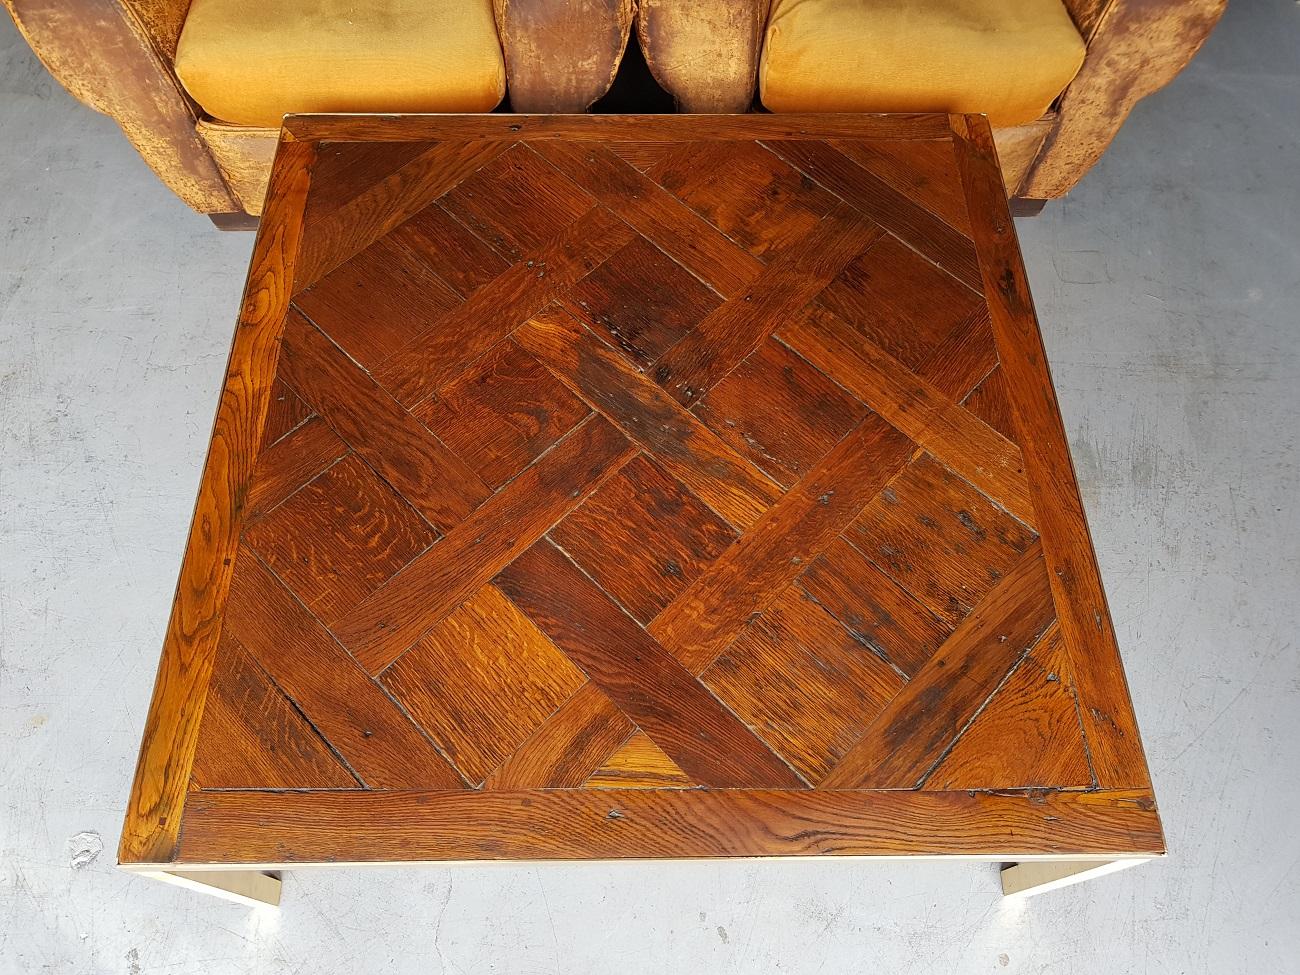 Modern look 18th century French oak floor panel made in to a coffee table with polished brass base, second half of the 20th century.

The measurements are:
Depth 104.5 cm/ 41.1 inch.
Width 104.5 cm/ 41.1 inch.
Height 40.5 cm/ 15.9 inch.